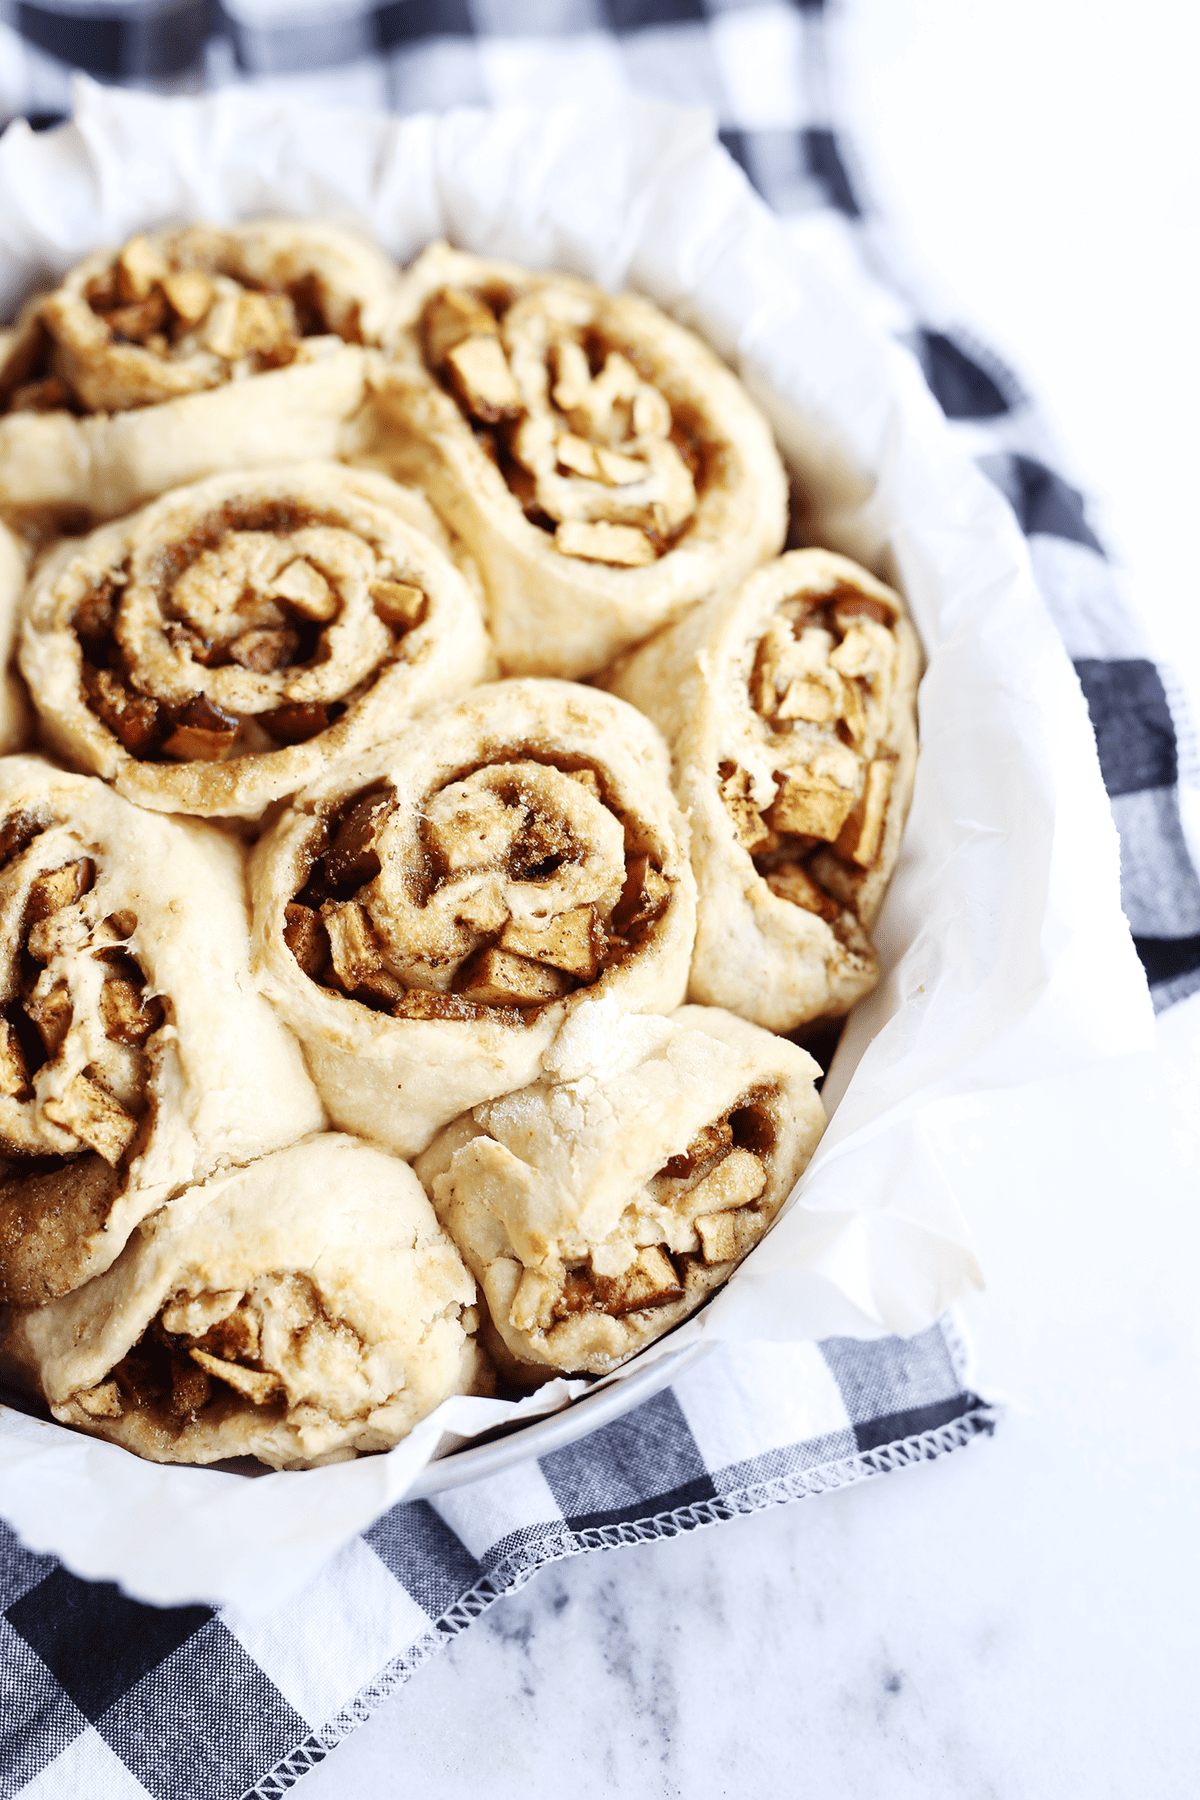 These easy Apple Spice Rolls taste just like a homemade apple pie wrapped in a super soft and perfectly doughy roll. Vegan and super yum!